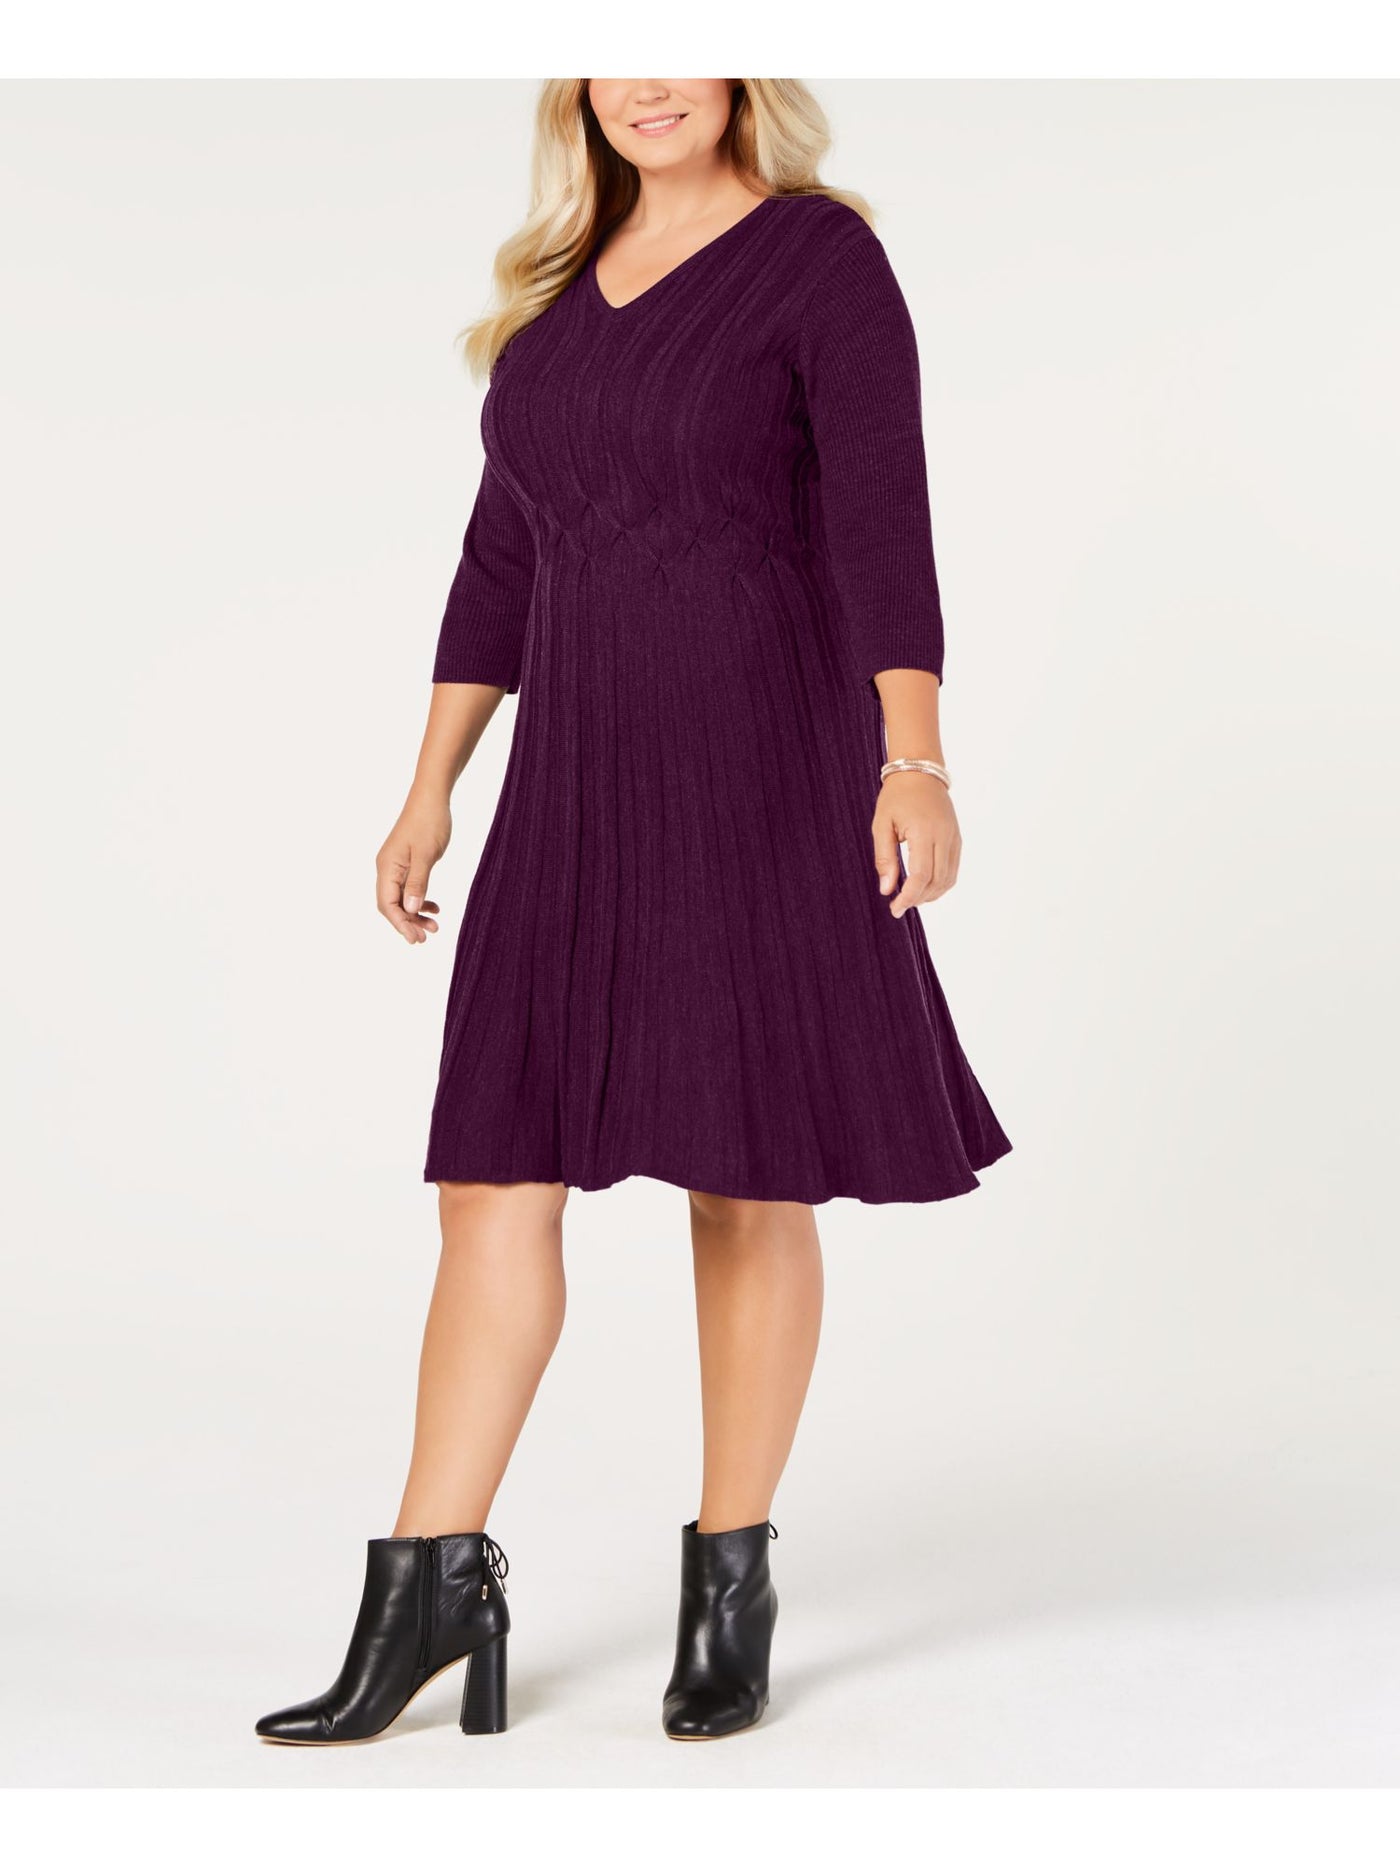 CONNECTED APPAREL Womens Purple Ribbed Striped 3/4 Sleeve V Neck Knee Length Evening Fit + Flare Dress Plus 3X